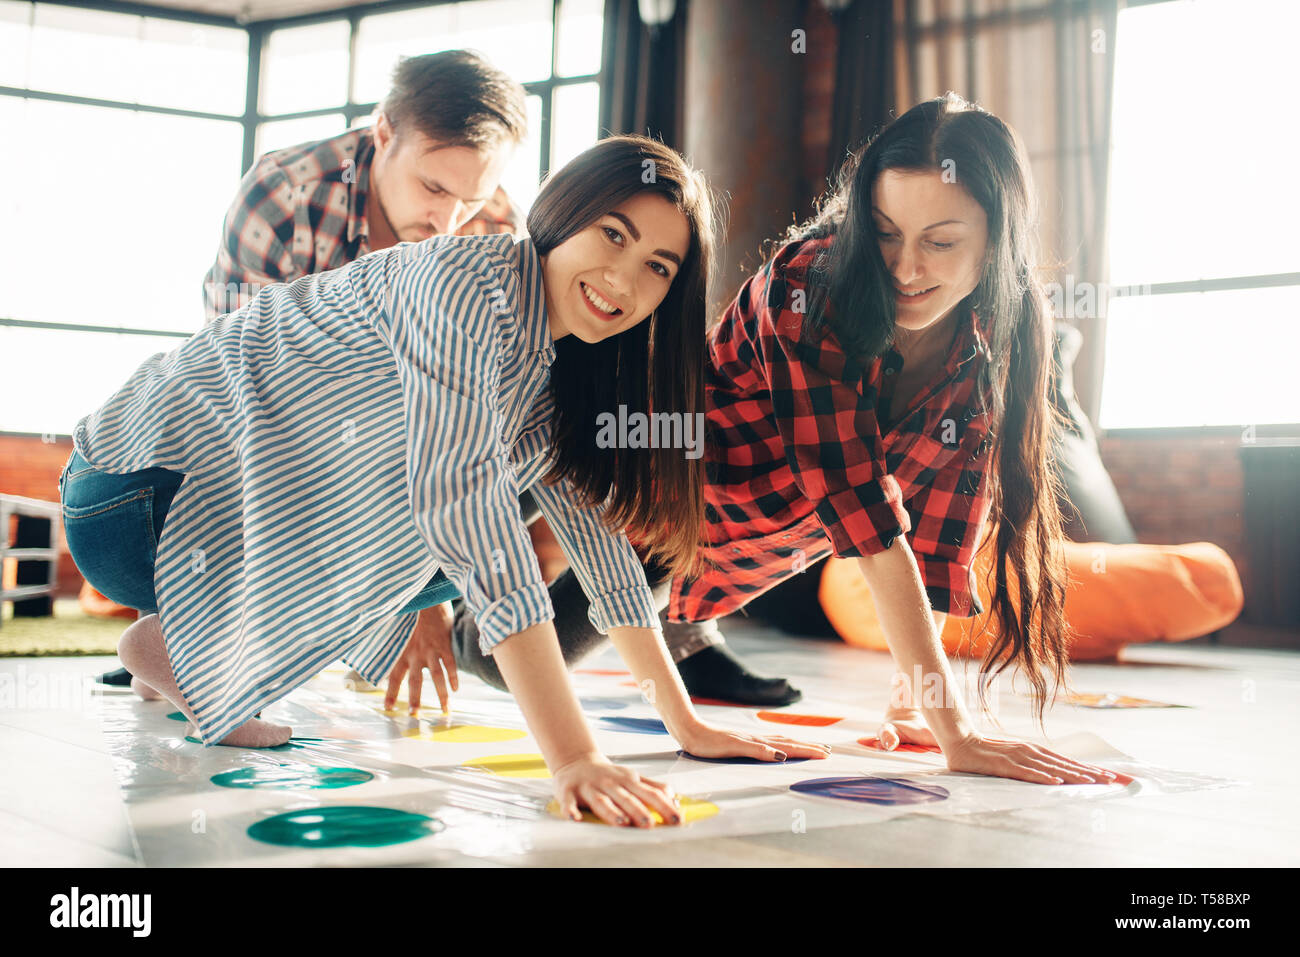 Group of students playing twister game Stock Photo